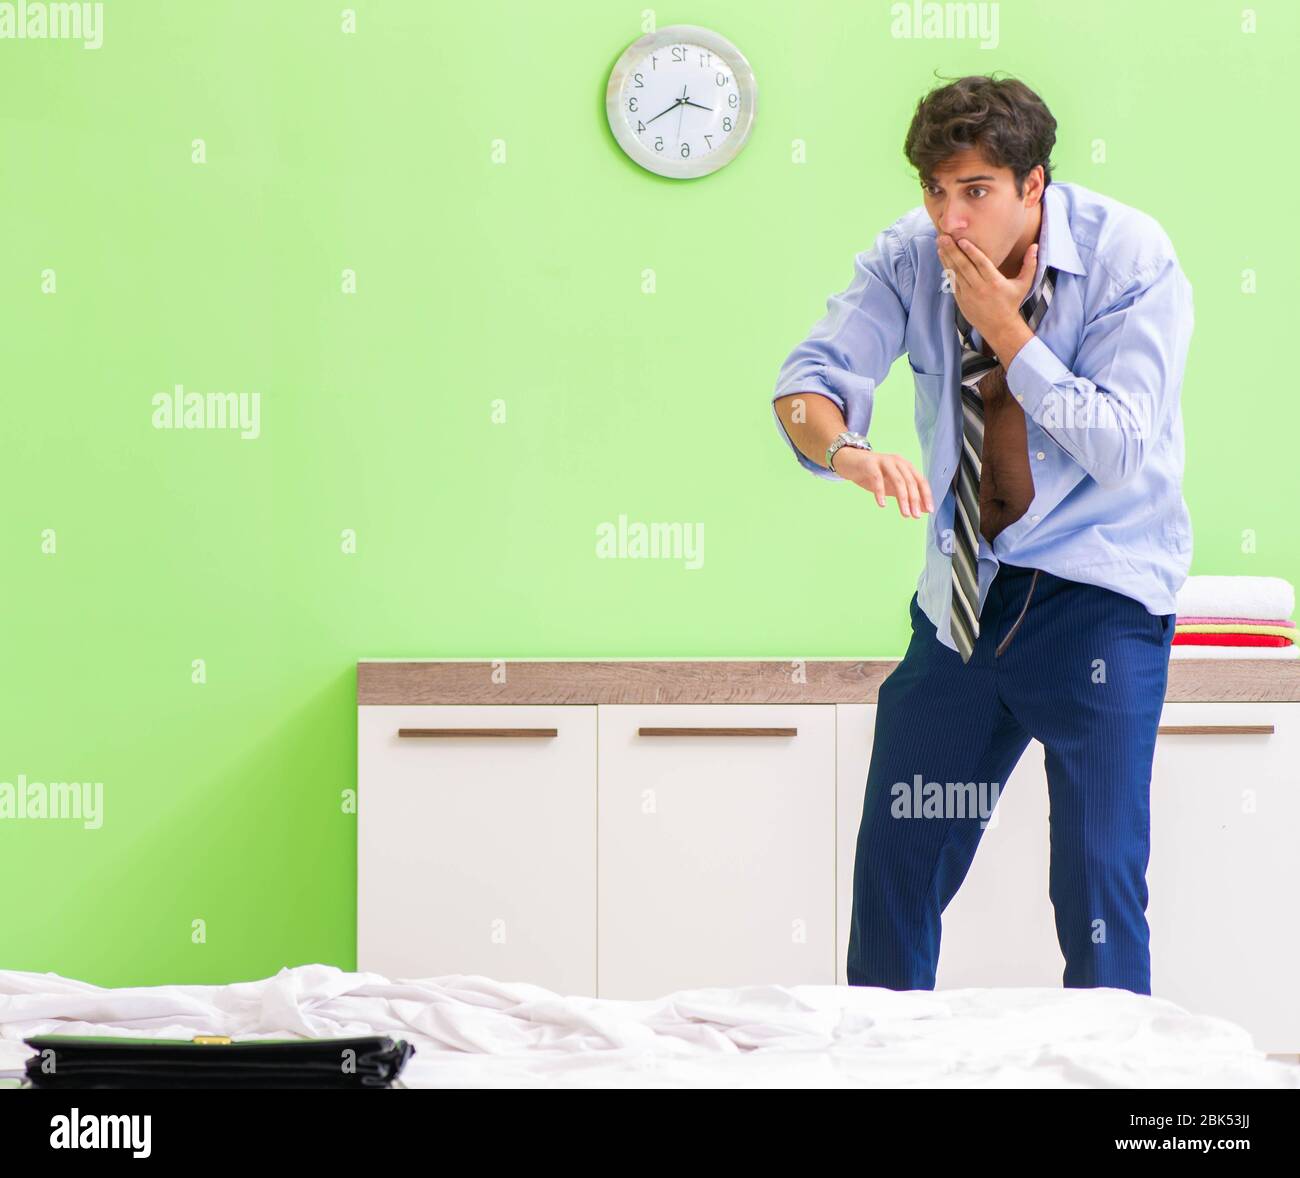 The young businessman employee late for office Stock Photo